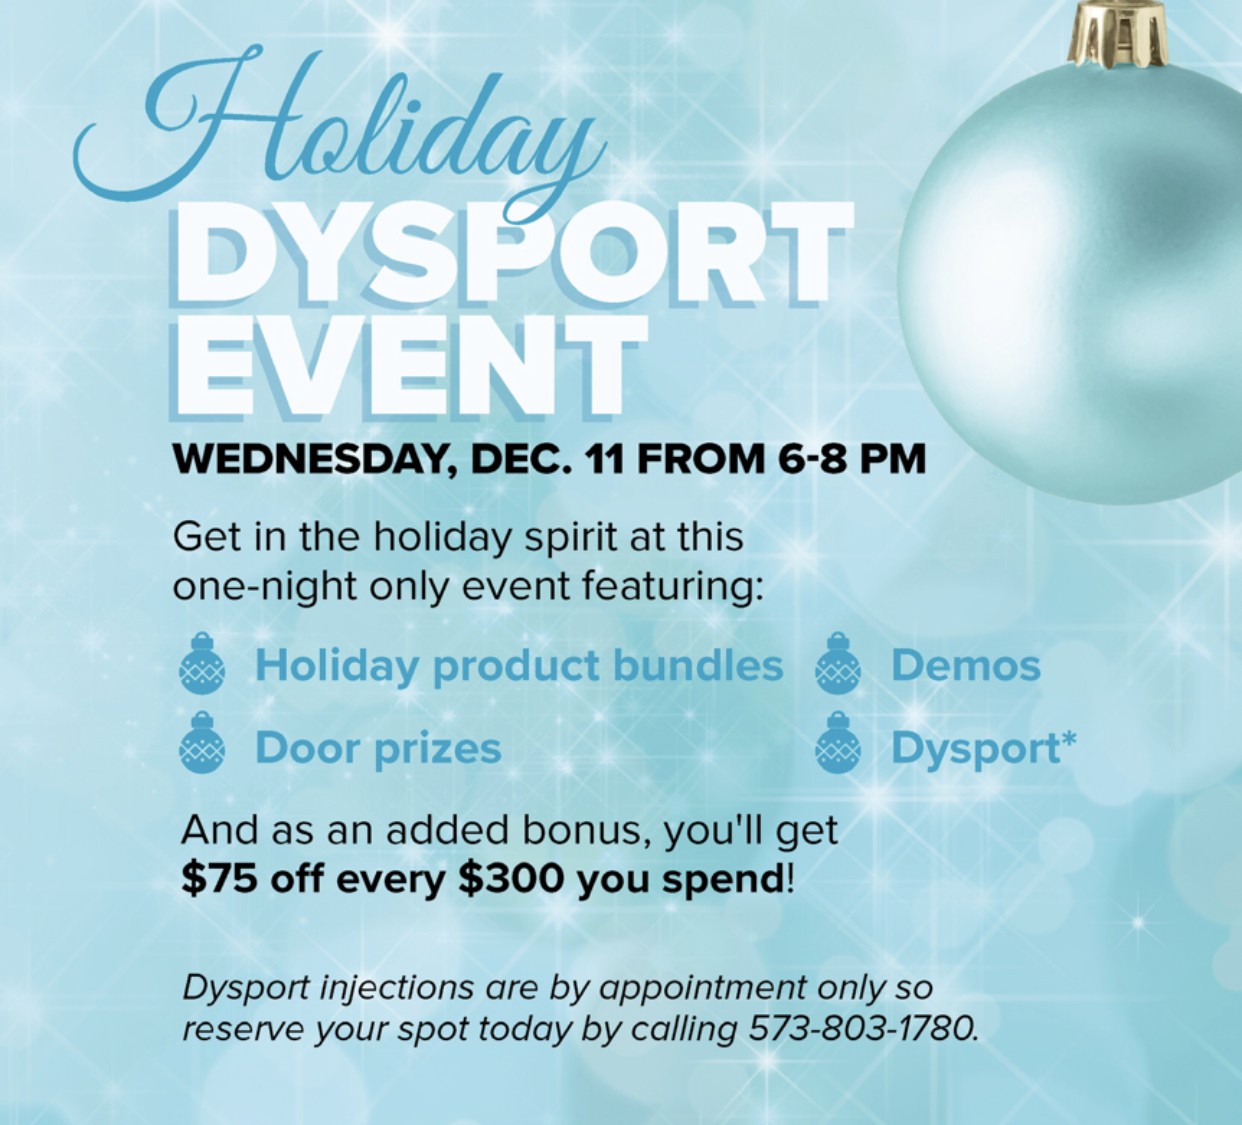 HOLIDAY DYSPORT EVENT